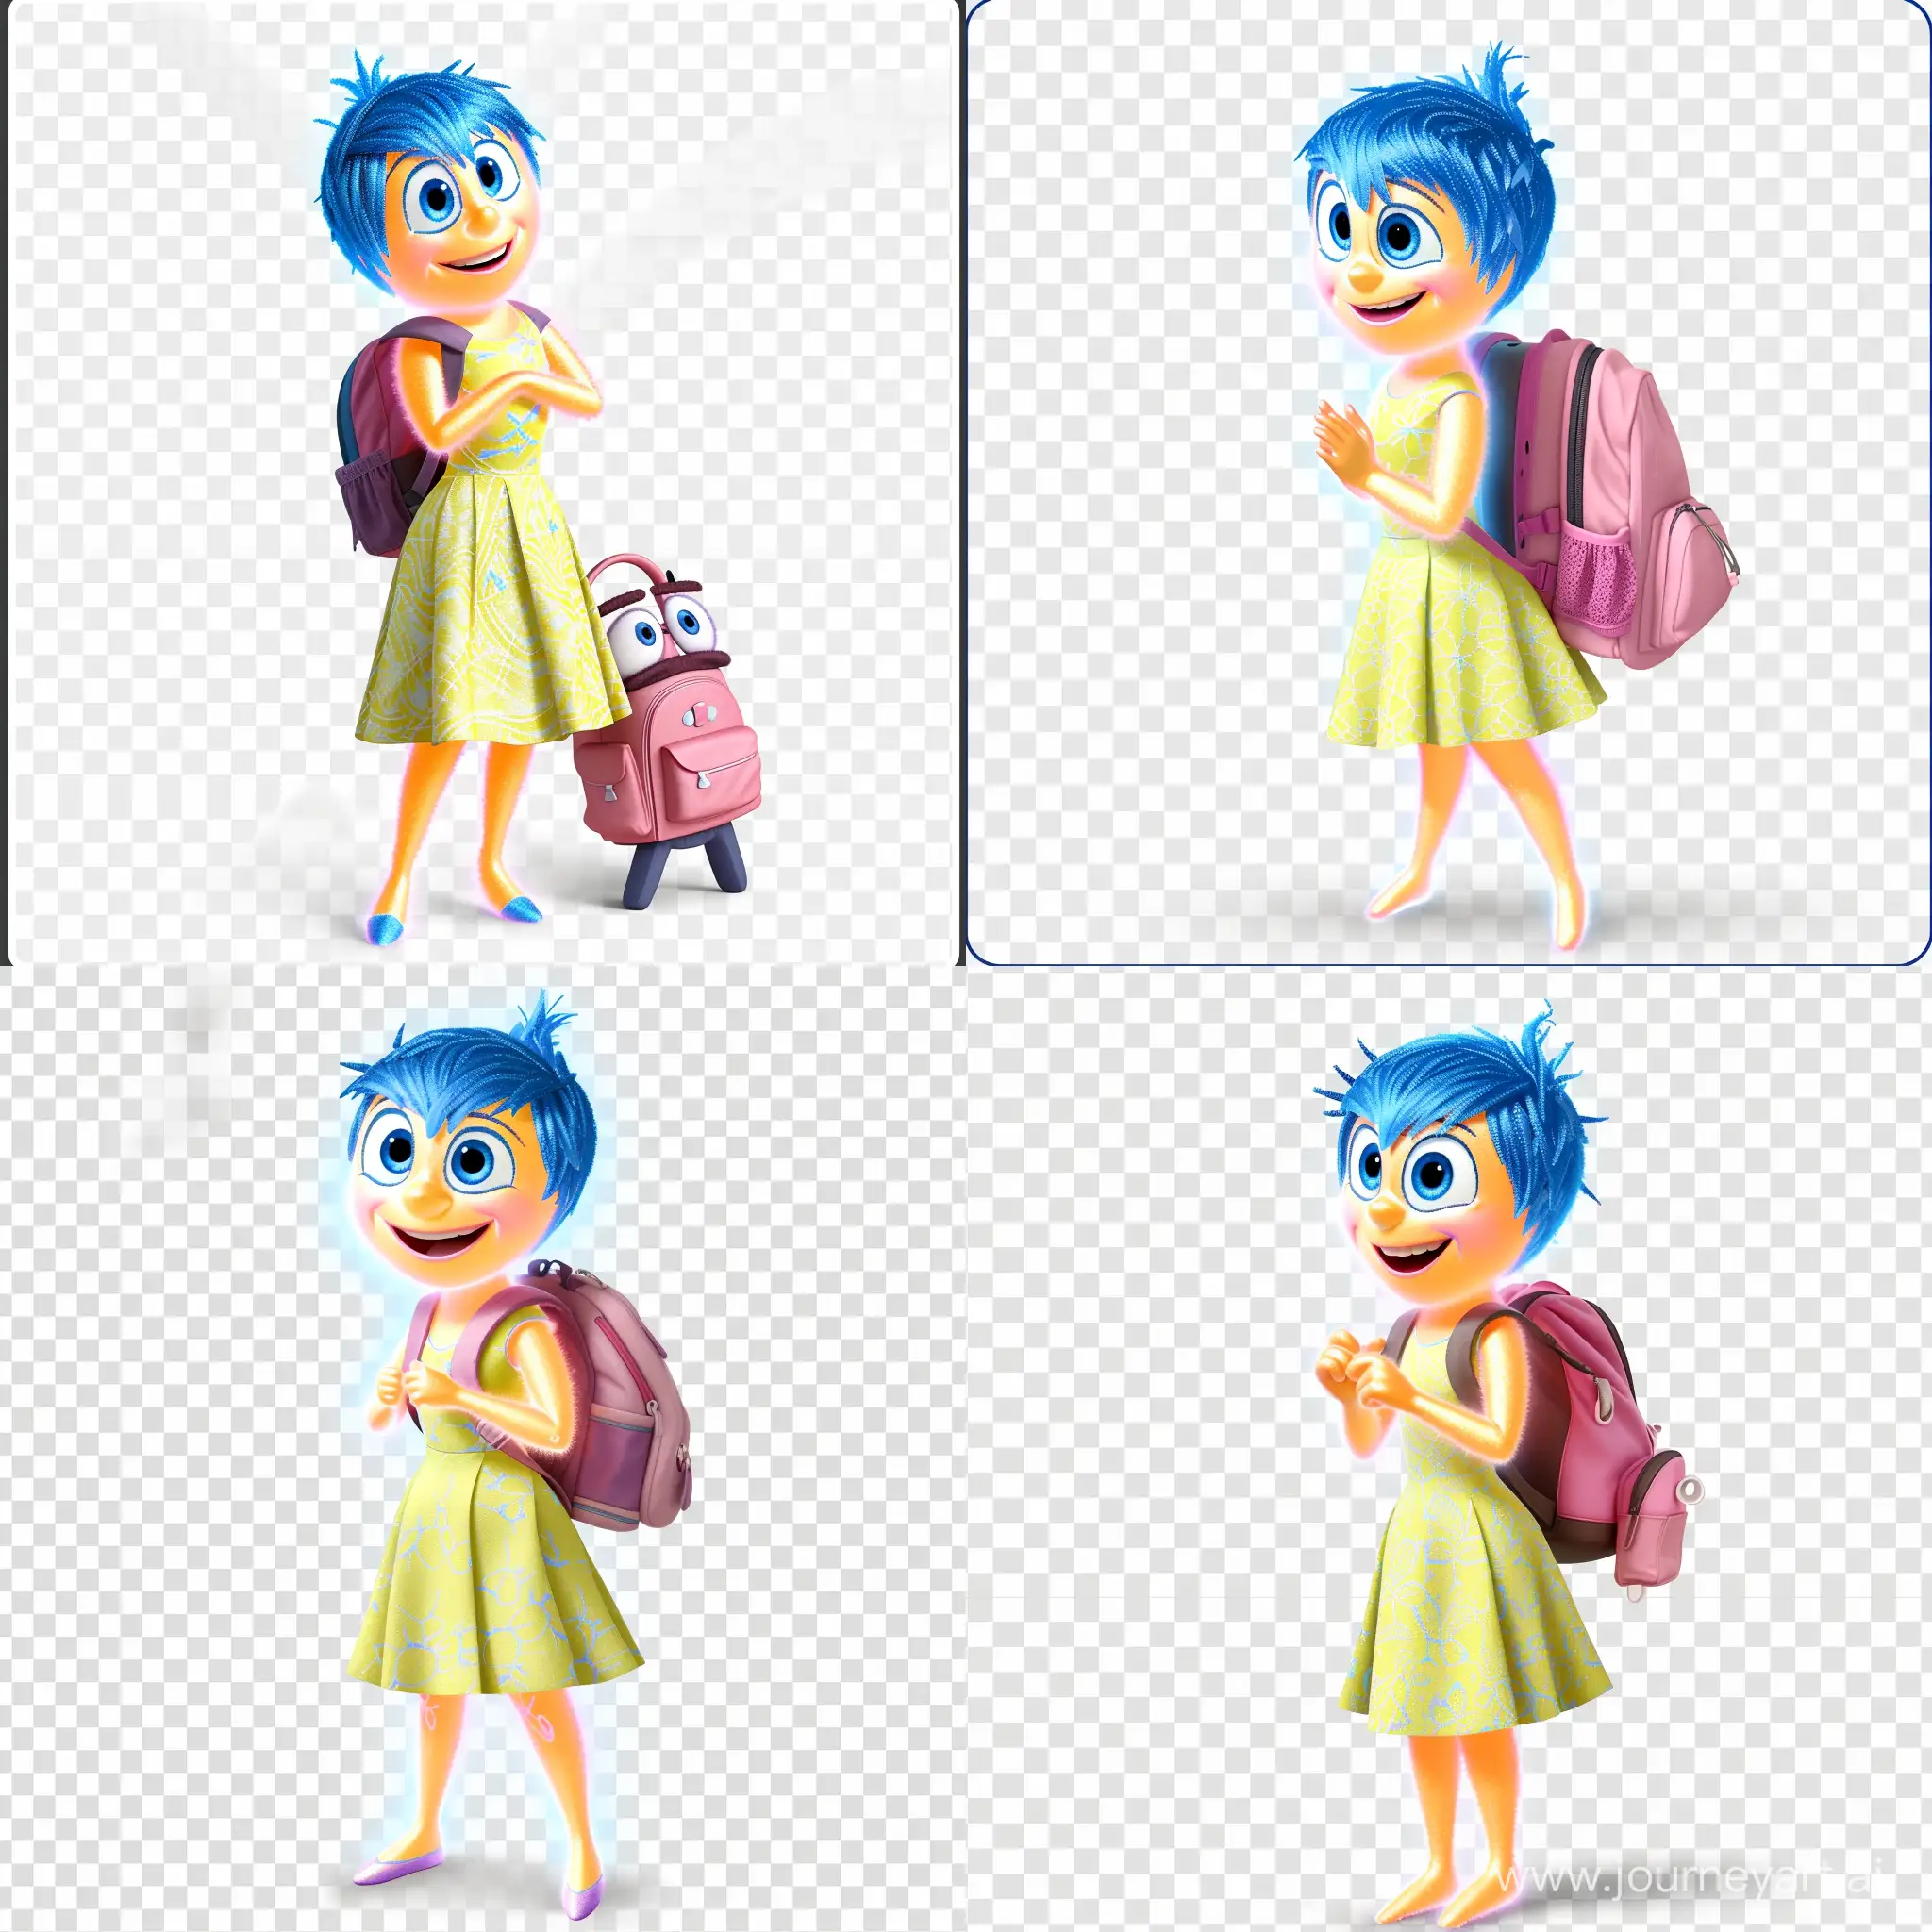 Joy-from-Inside-Out-with-Blue-Hair-Smiling-and-Pink-School-Backpack